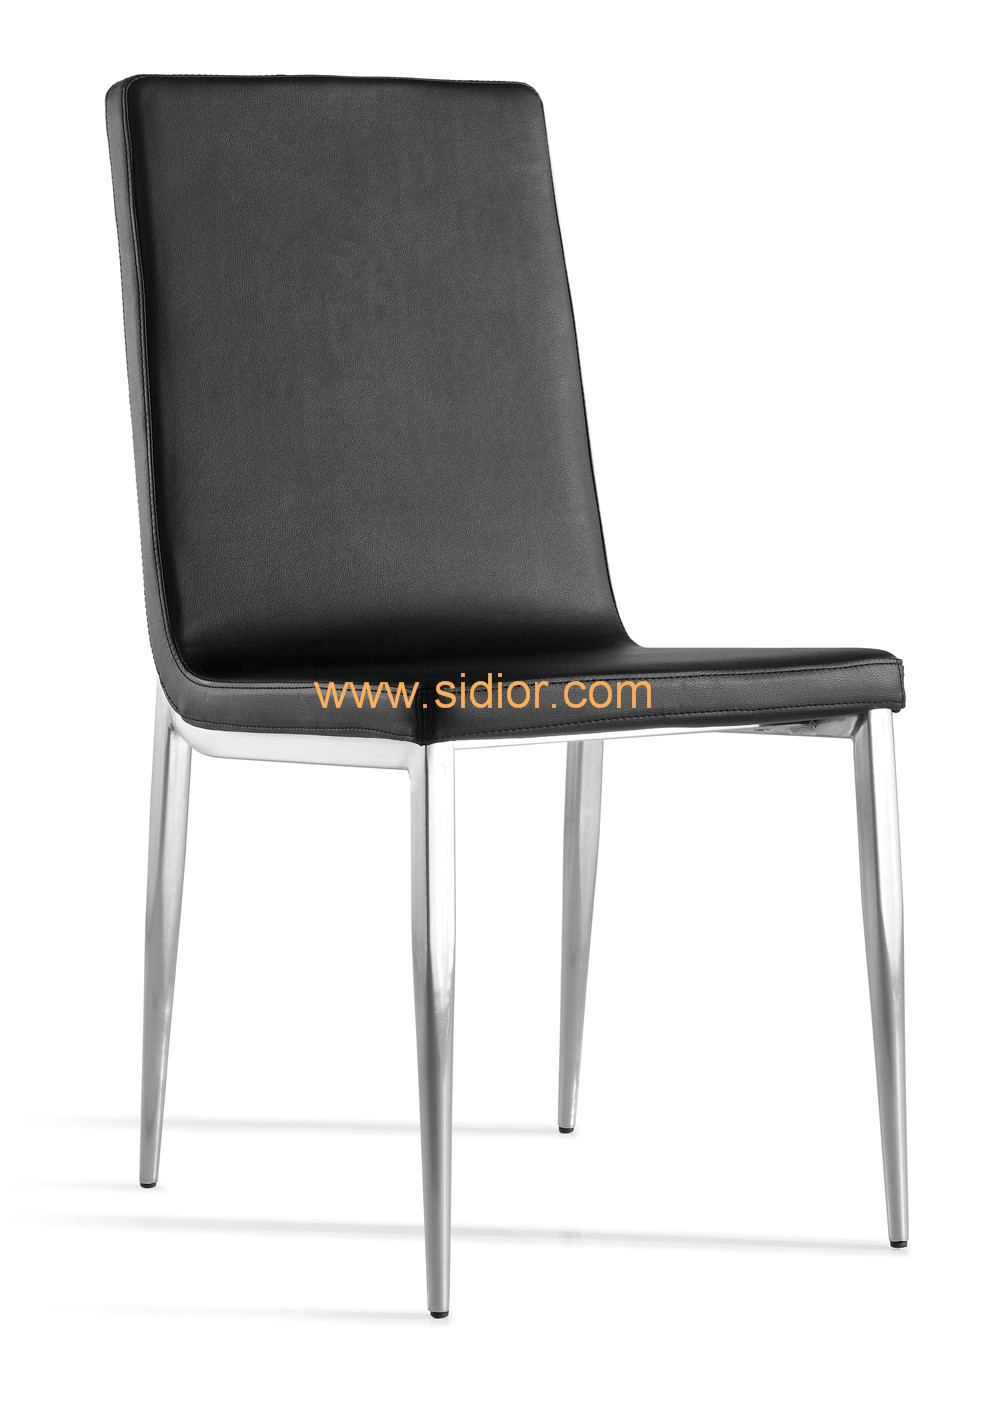 (SD-1019) Modern Hotel Restaurant Dining Furniture Stainless Steel Dining Chair